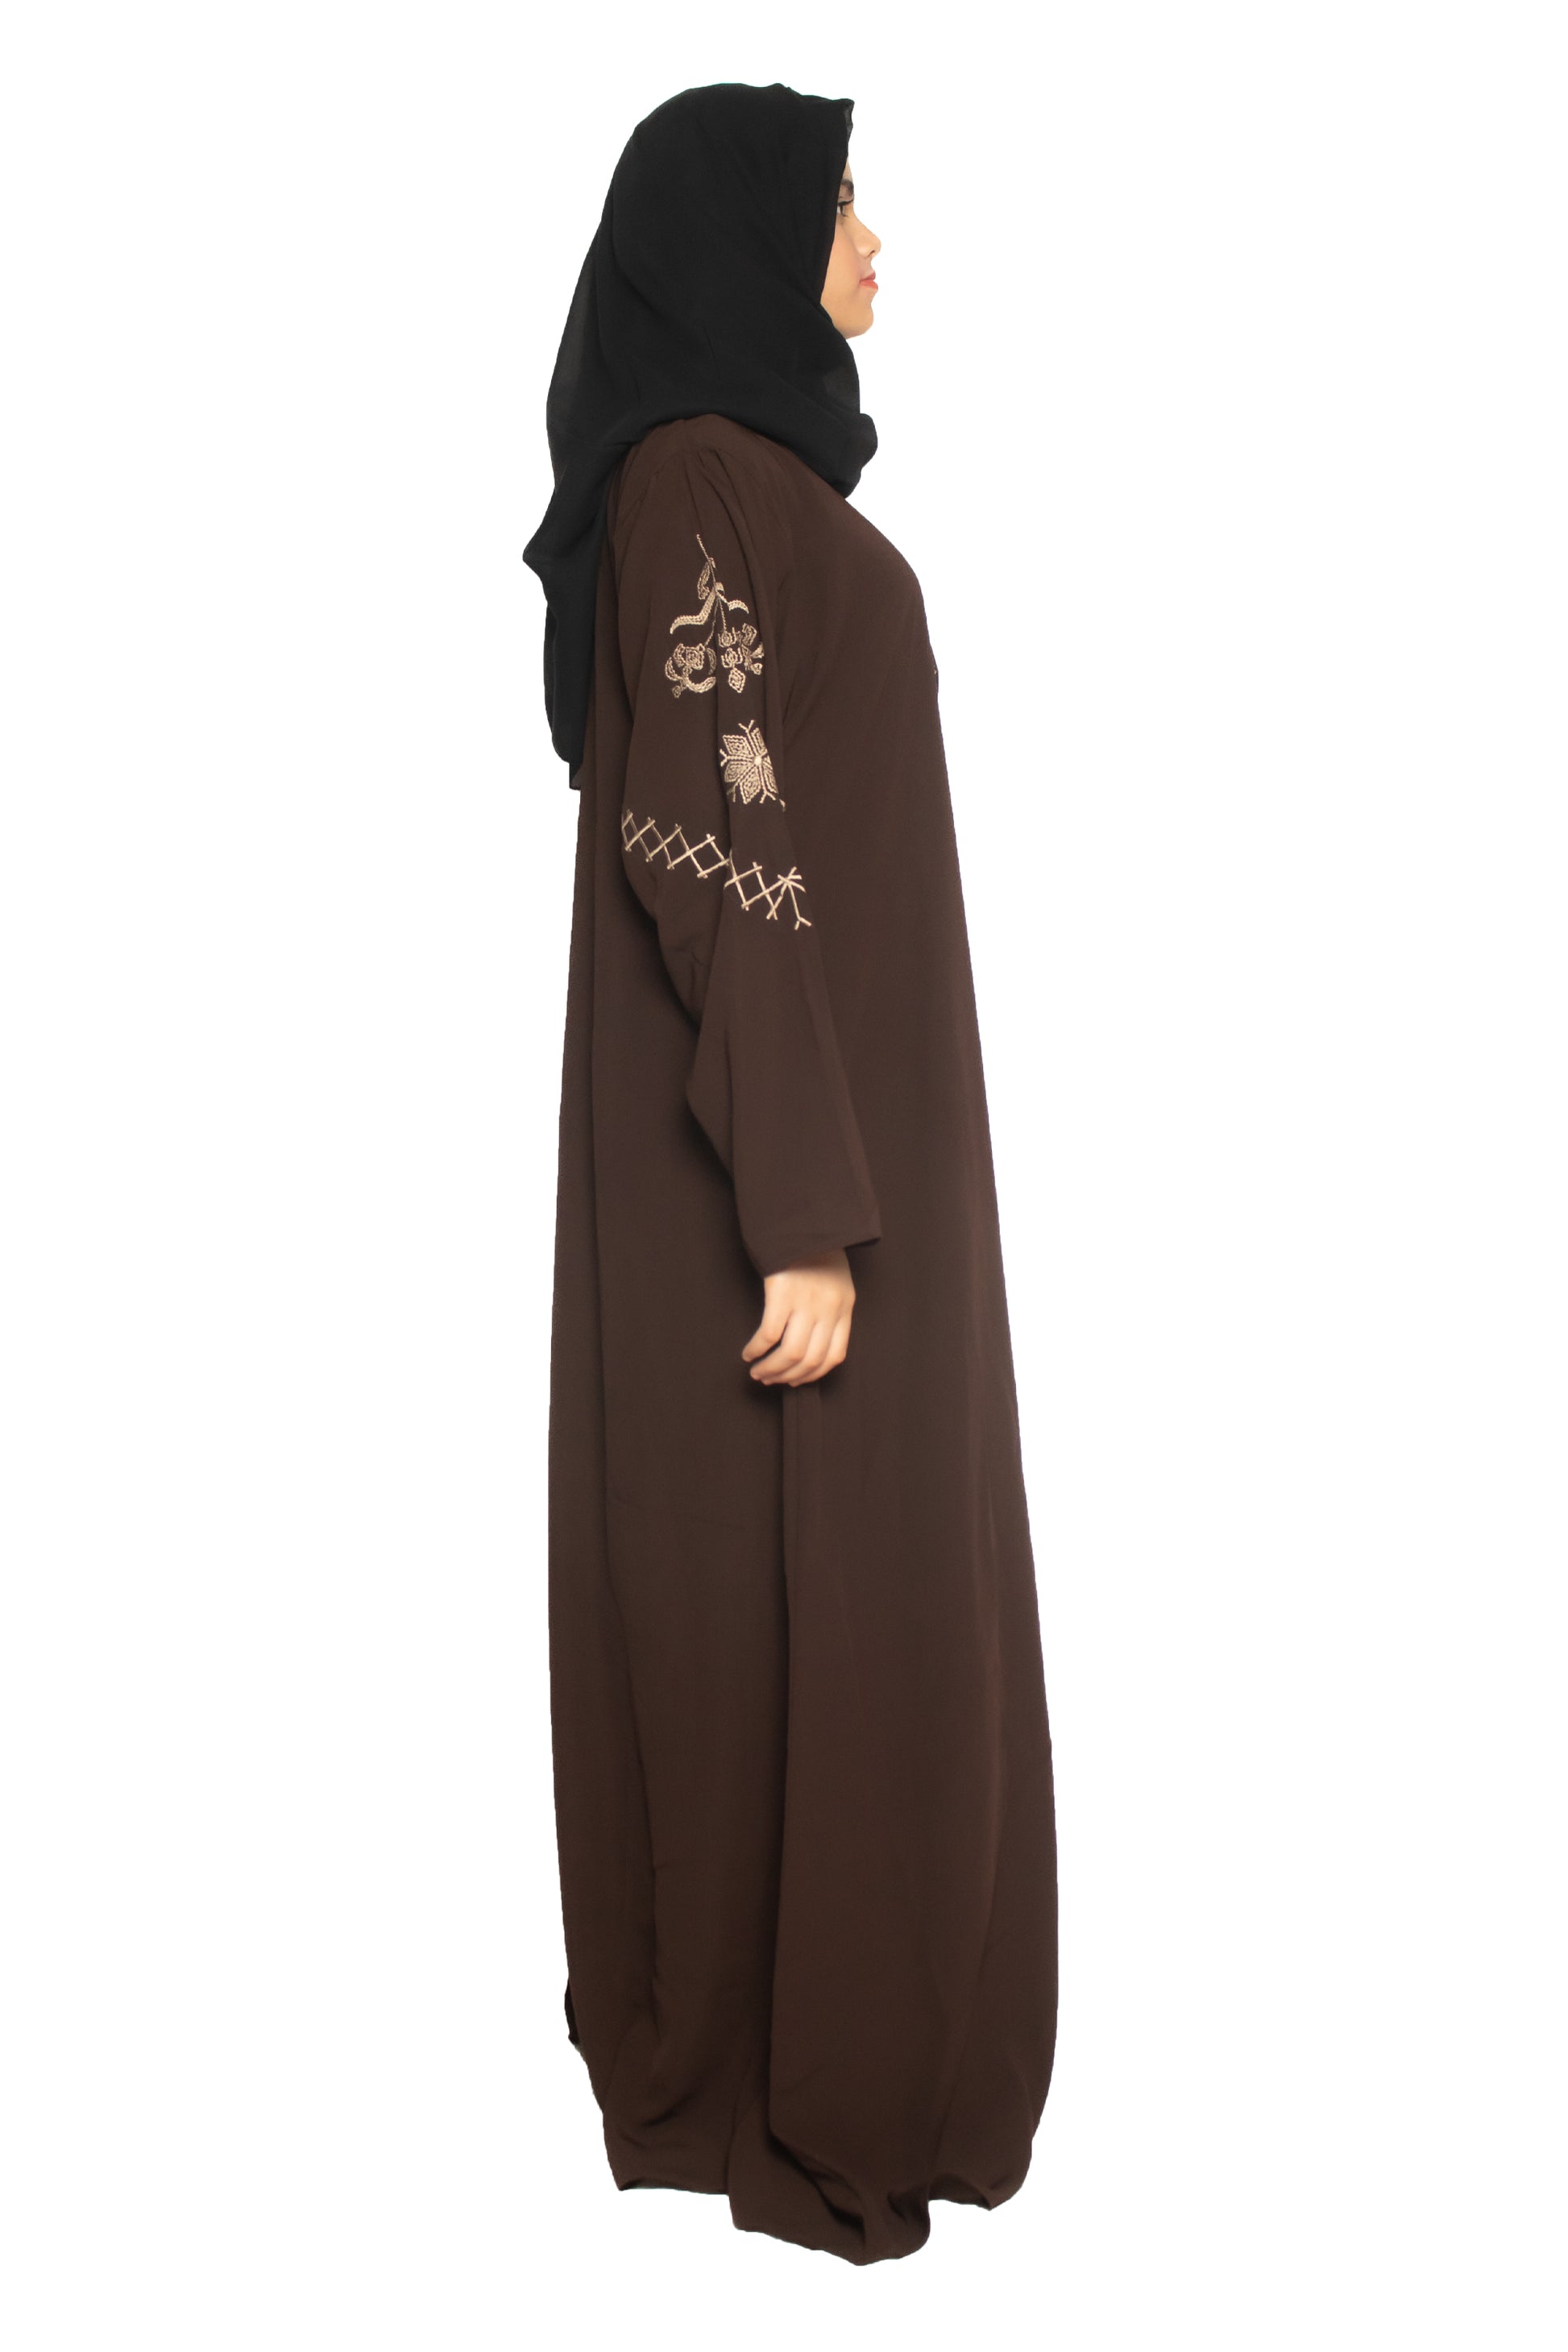 Modest City Self Design Front Open Zip Embroidered Brown Crepe Fabric Abaya or Burqa with Hijab for Women & Girls-Series Laiba